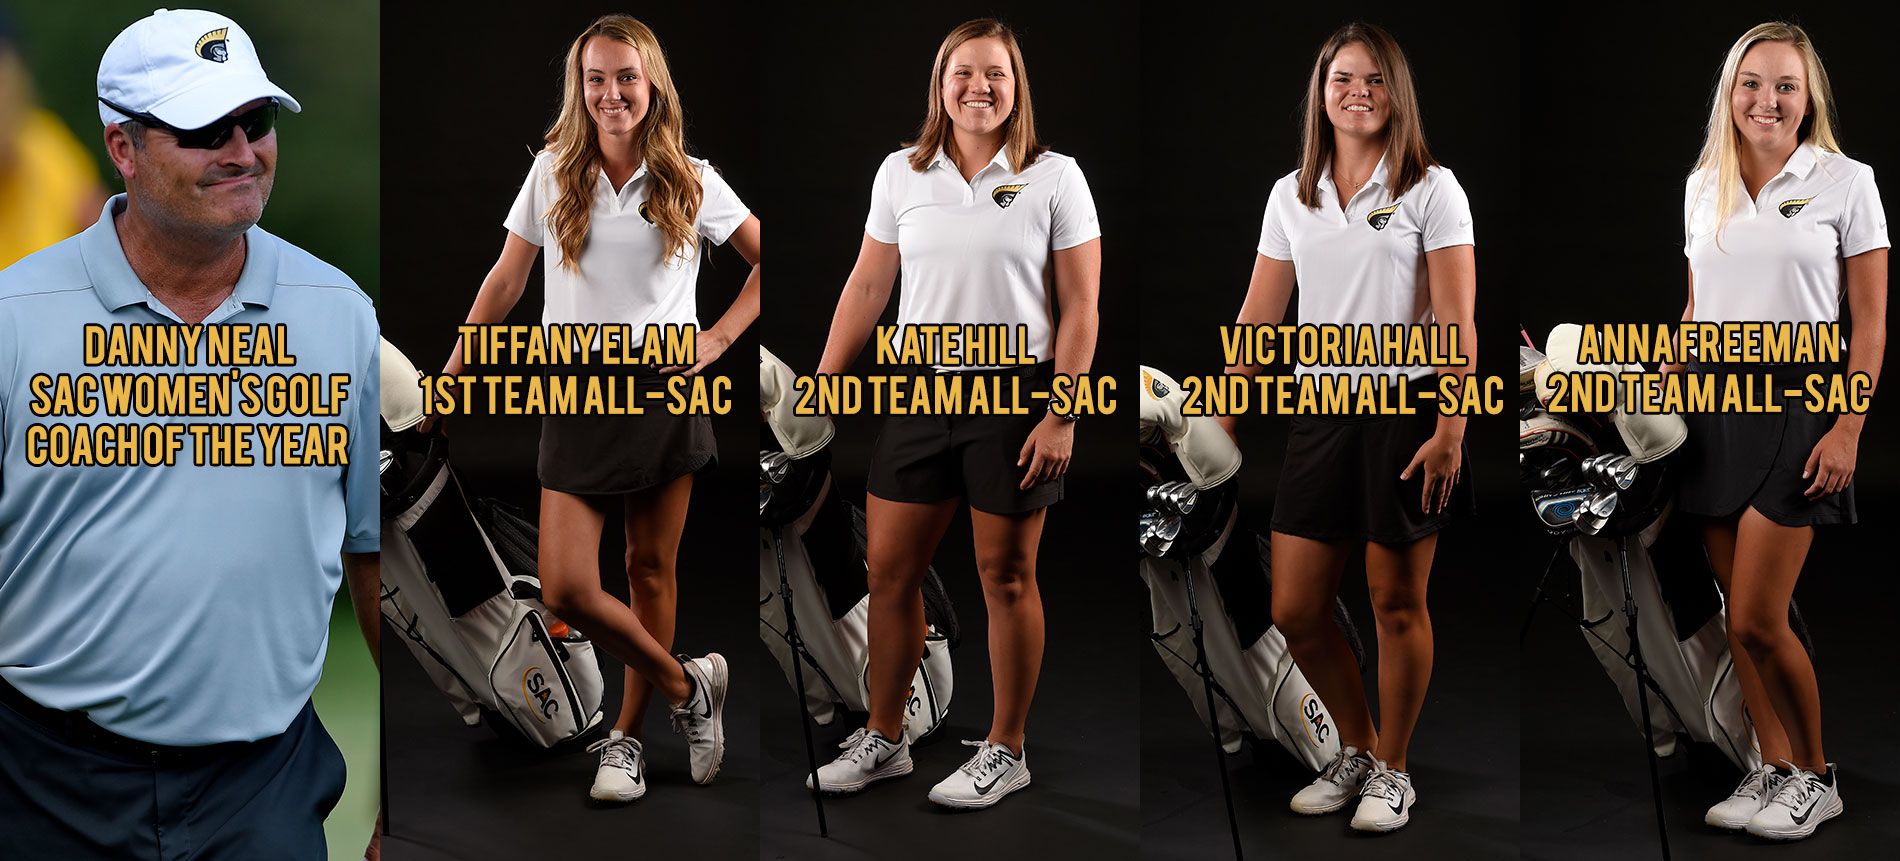 Four Trojans Earn Women’s Golf All-Conference Honors